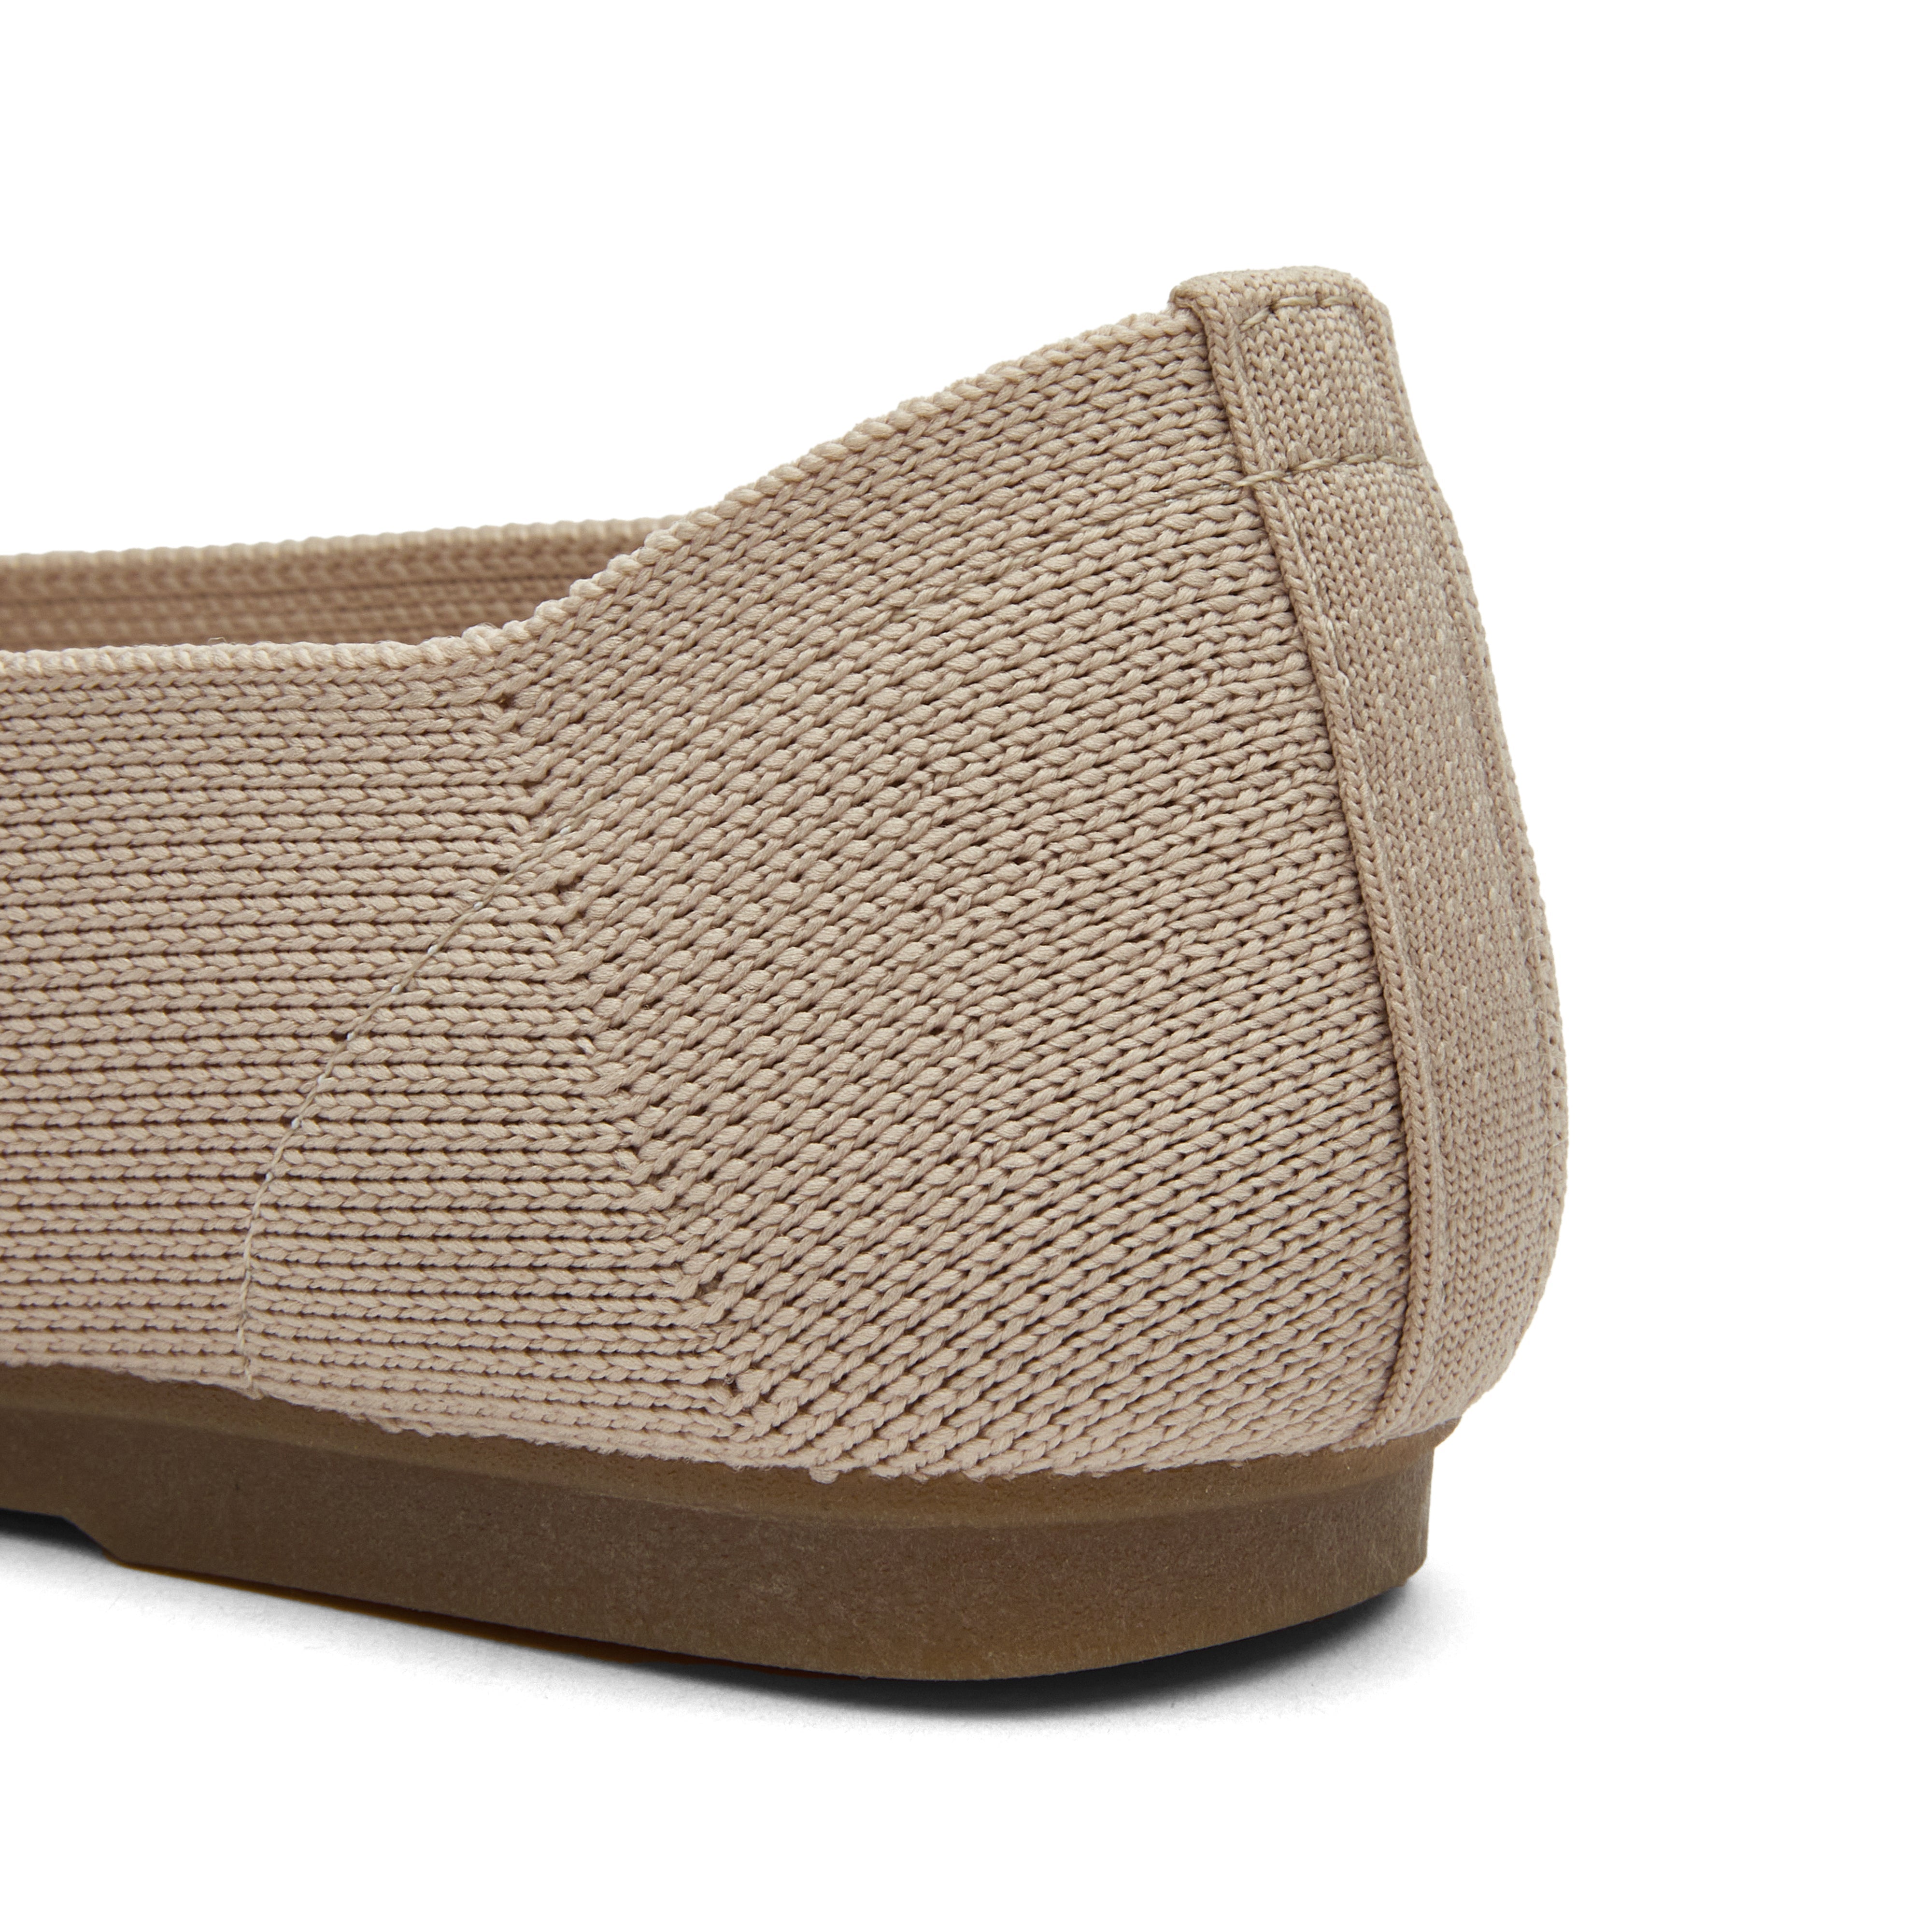 New Women Knit Woven Rounded Toe Flats